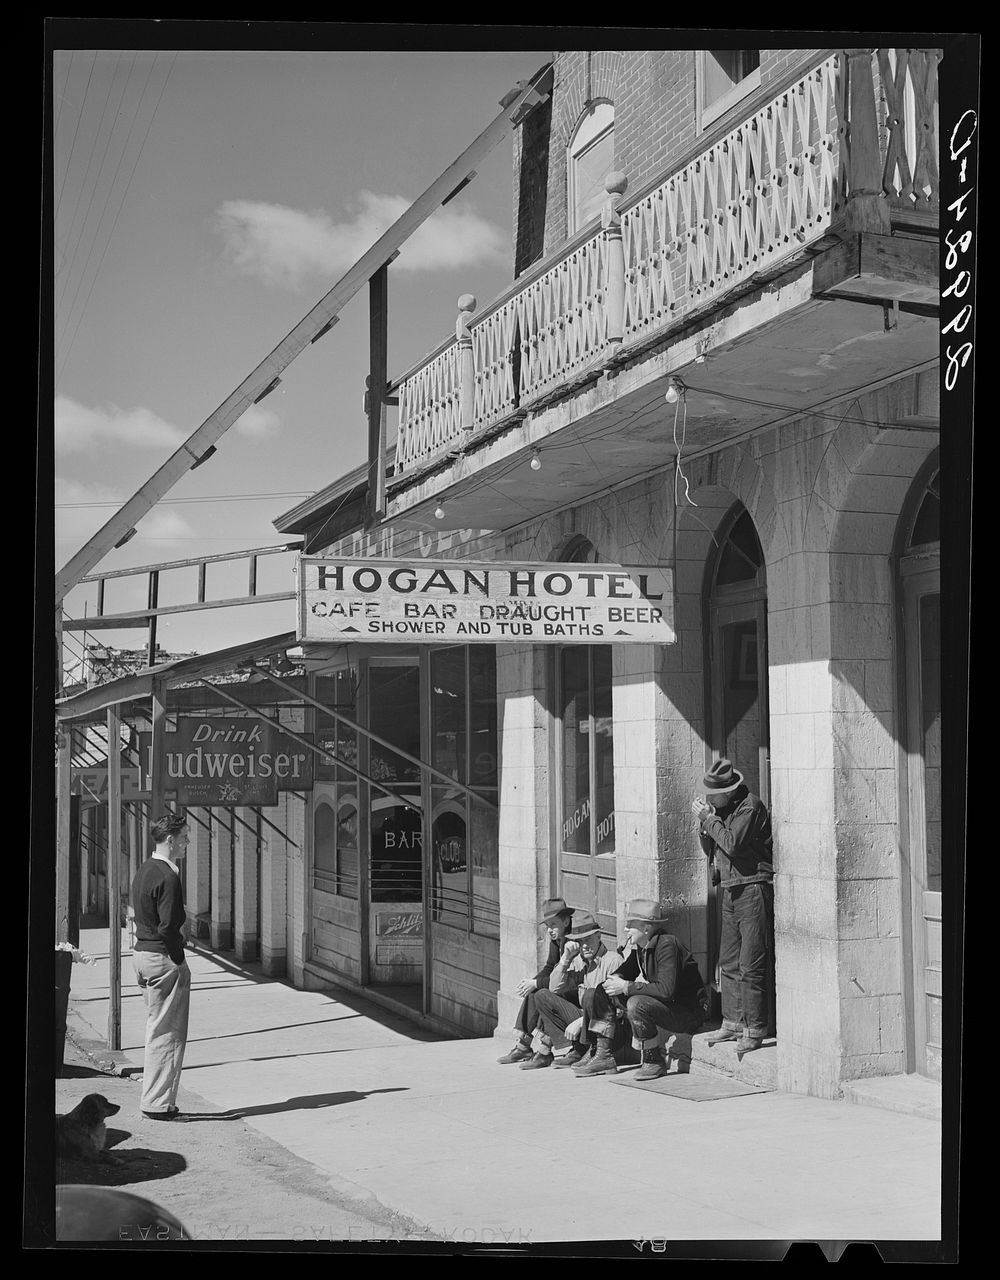 Hotel. Austin, Nevada. Sourced from the Library of Congress.